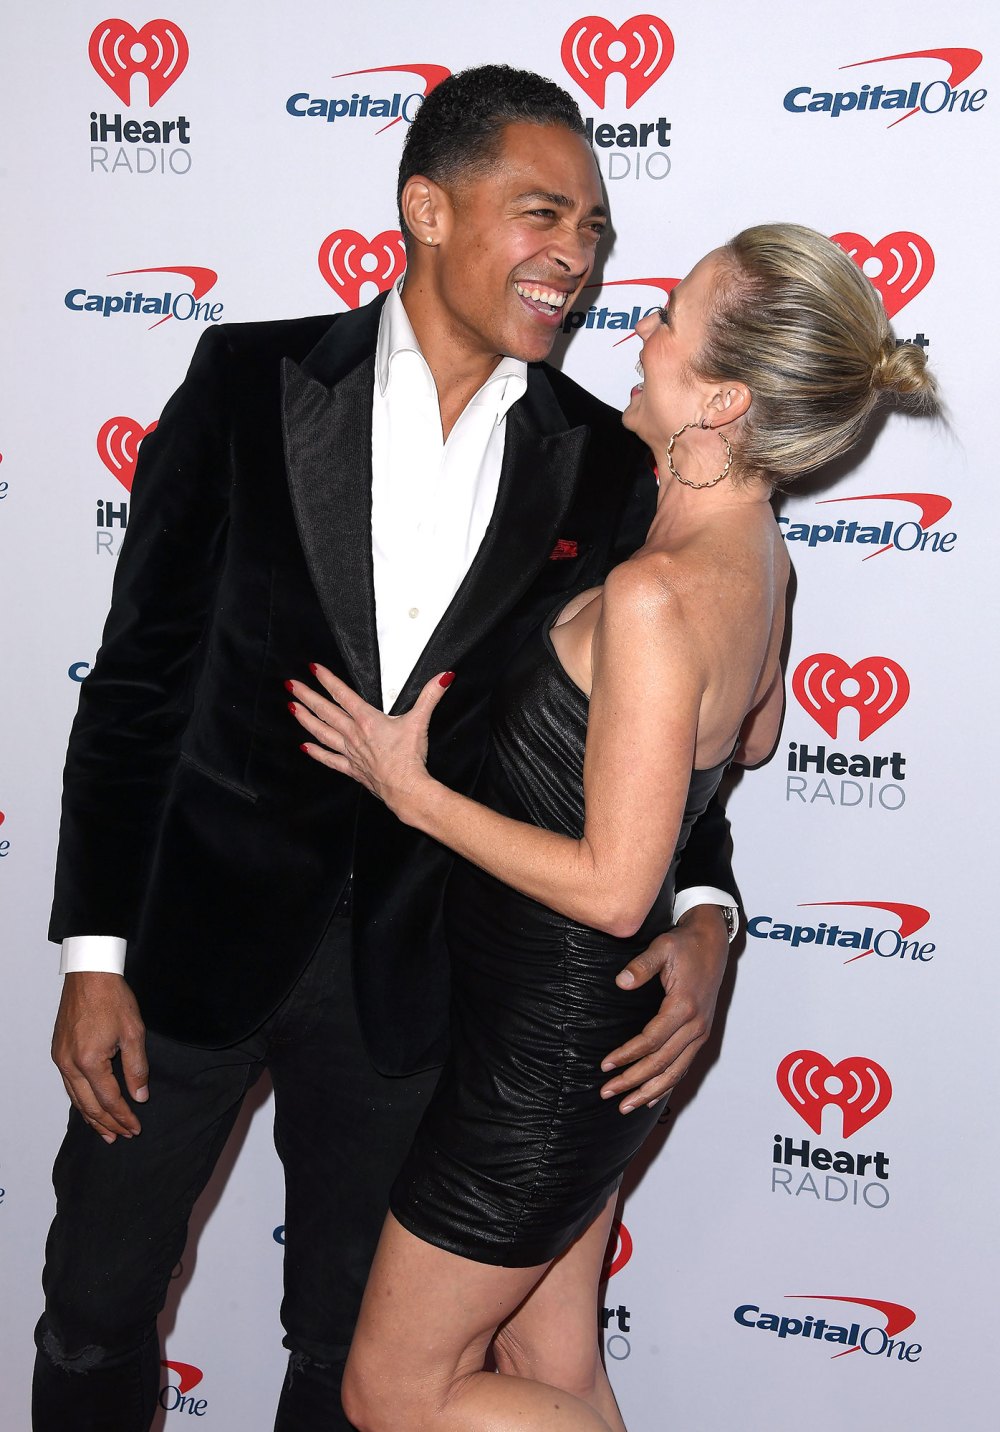 Amy Robach and TJ Holmes Reflect on Making Handsy Red Carpet Debut